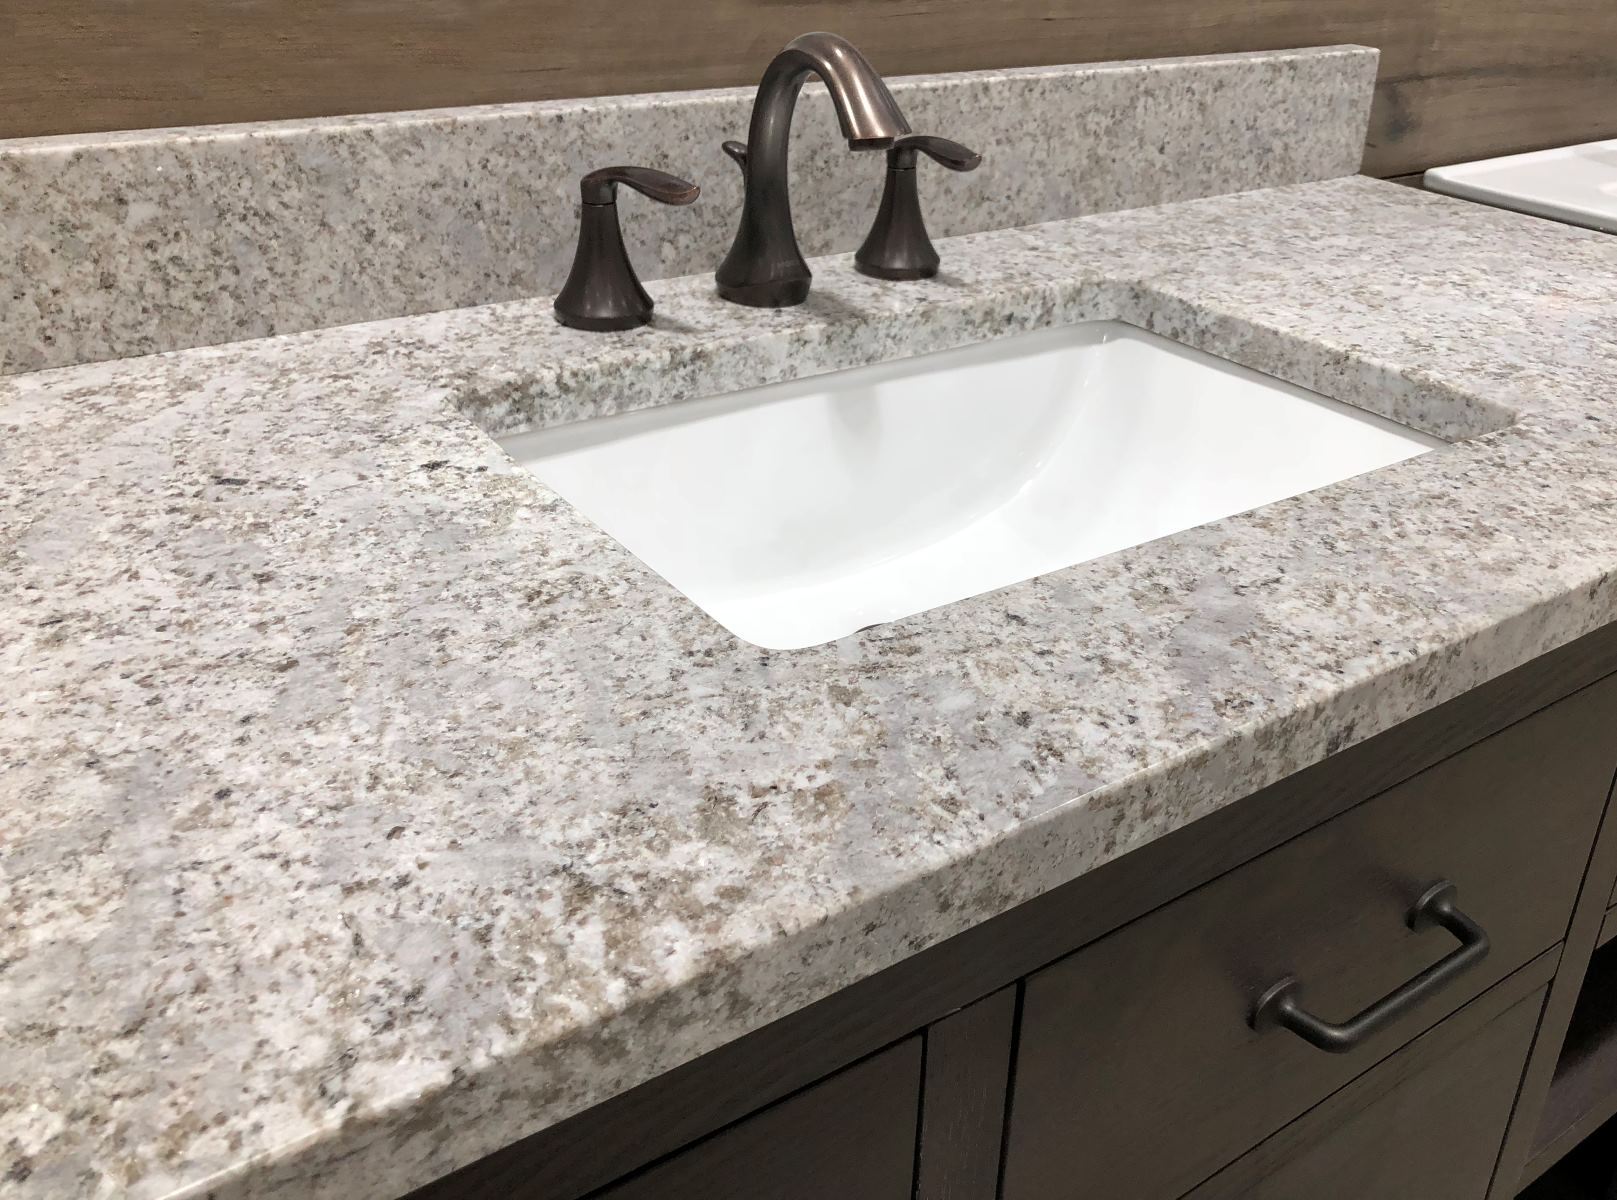 How Do You Remove Water Stains From Granite Countertops